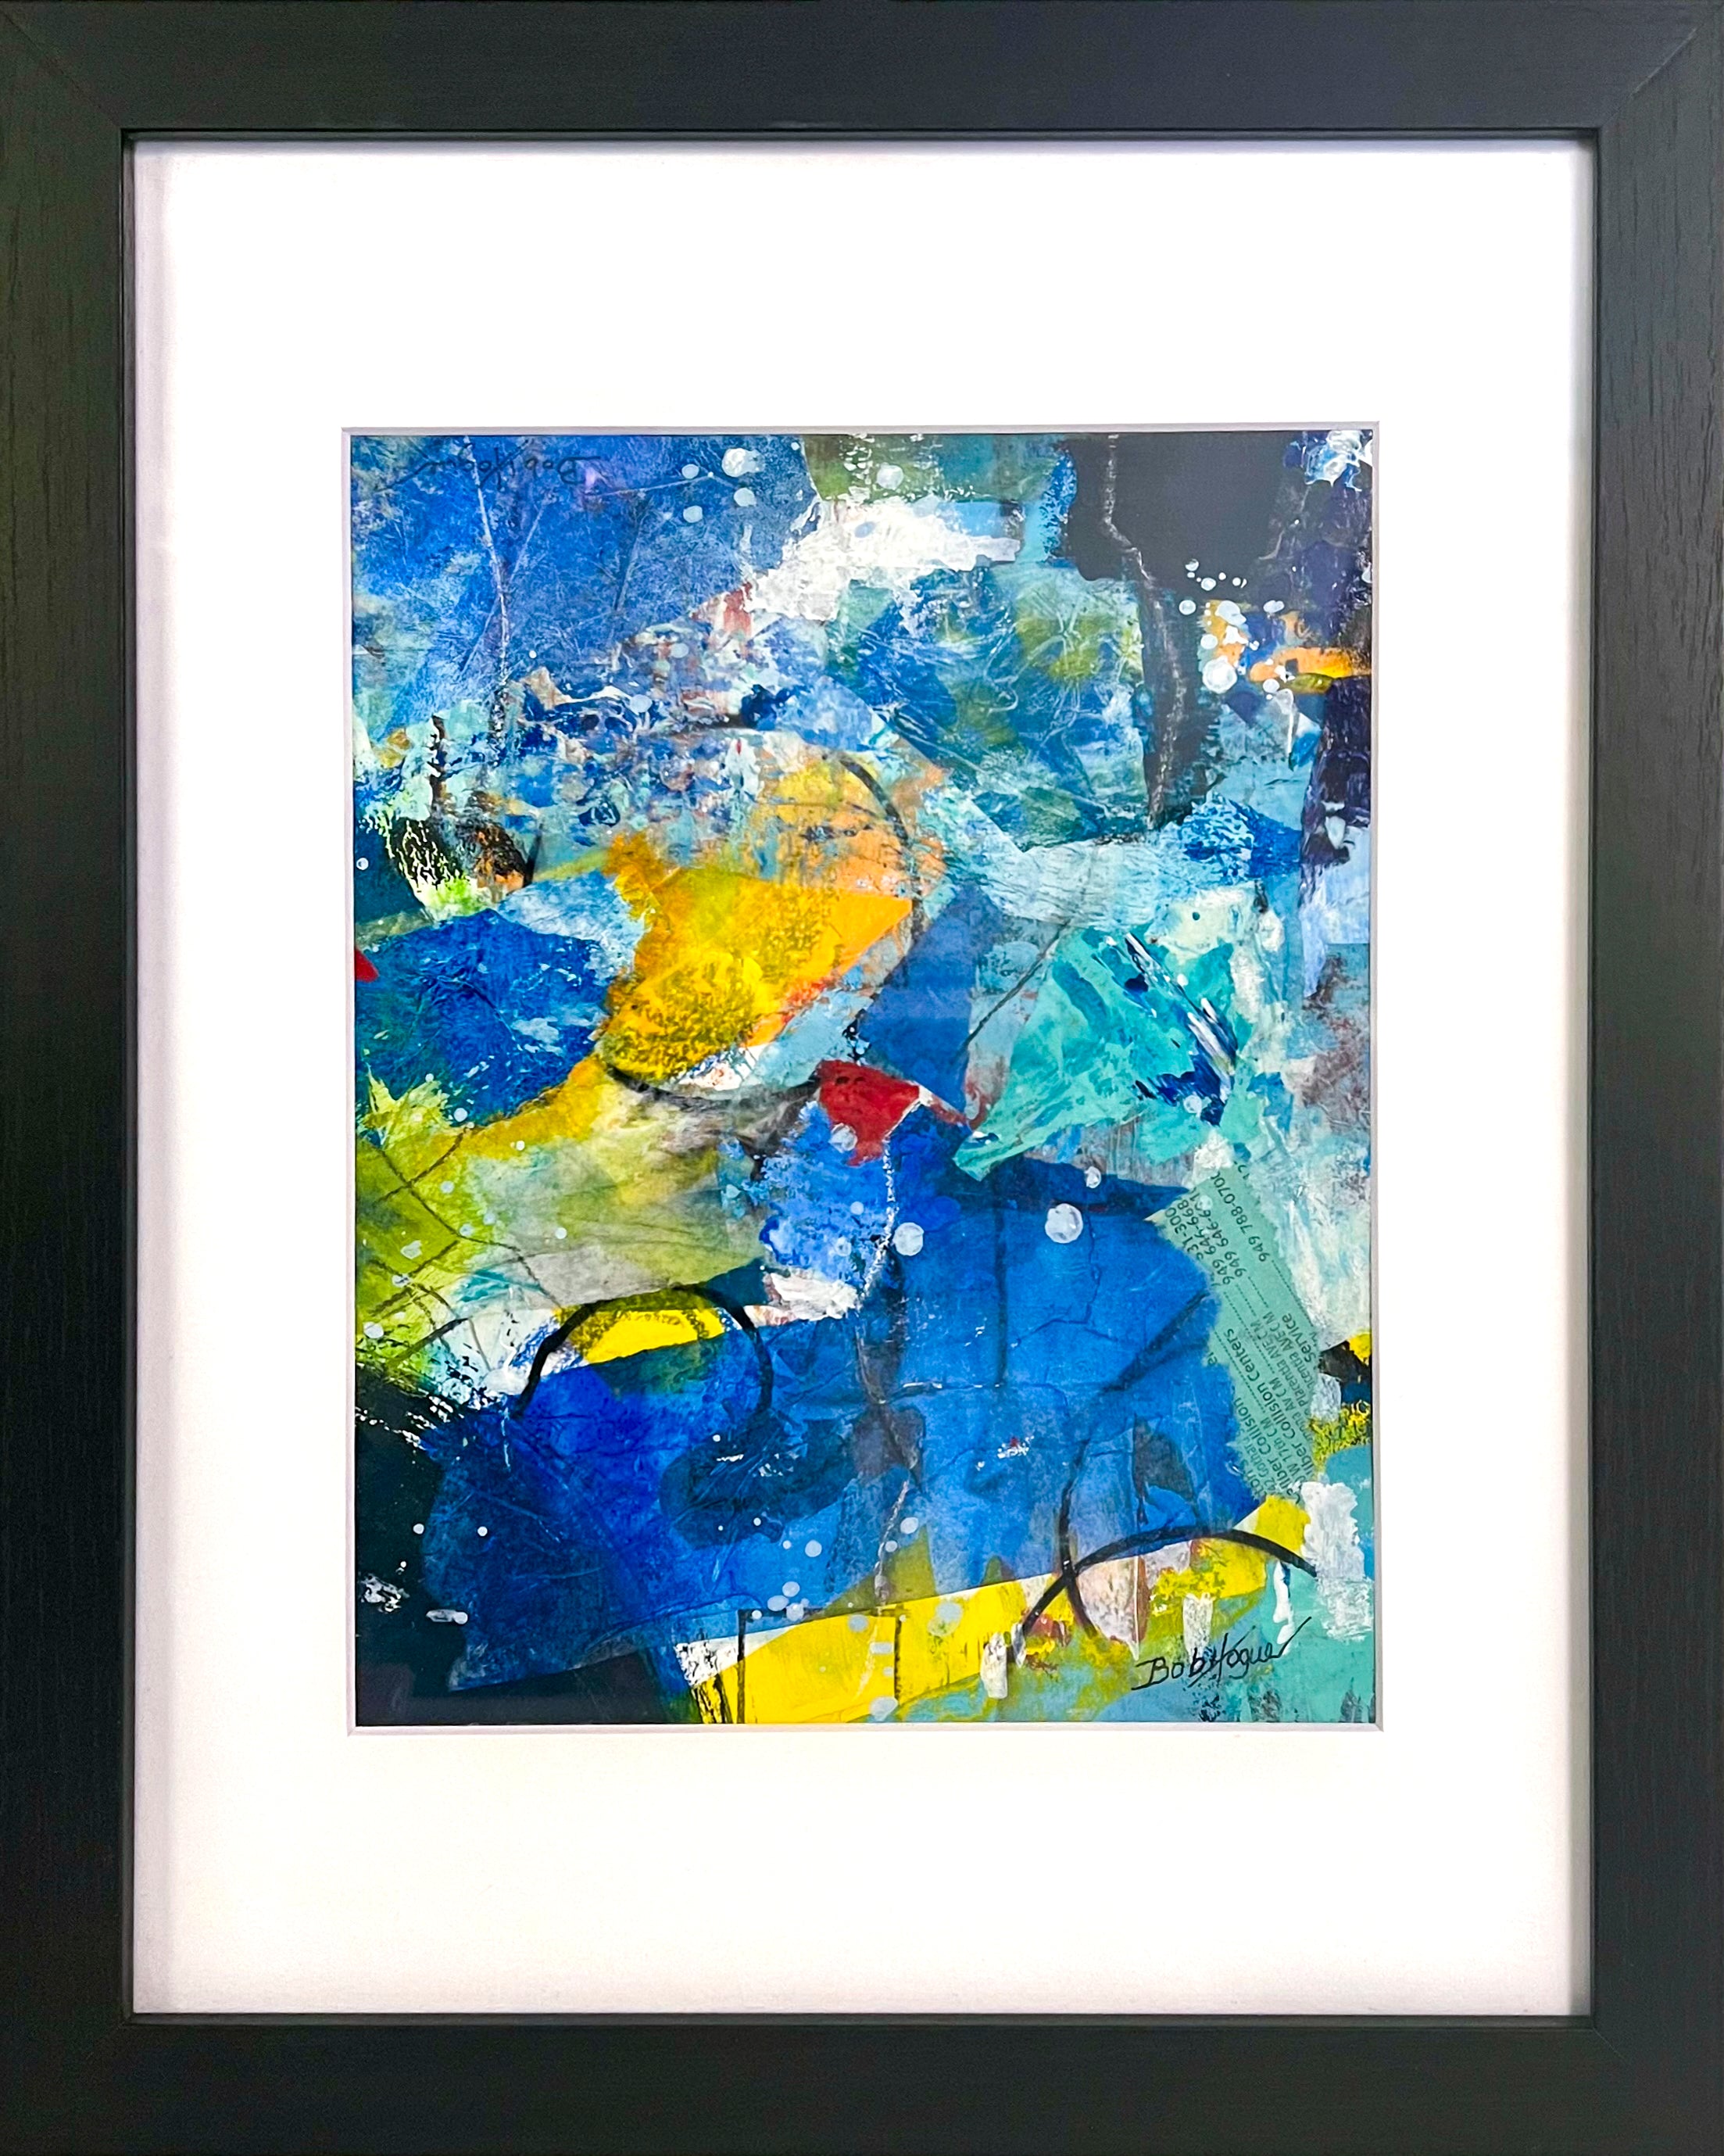 Colorful abstract painting using acrylic; predominant blue, yellow, with teal highlights; artist Bob Hogue; 8"x10" and w/black wood frame and white mat 11"x 14"